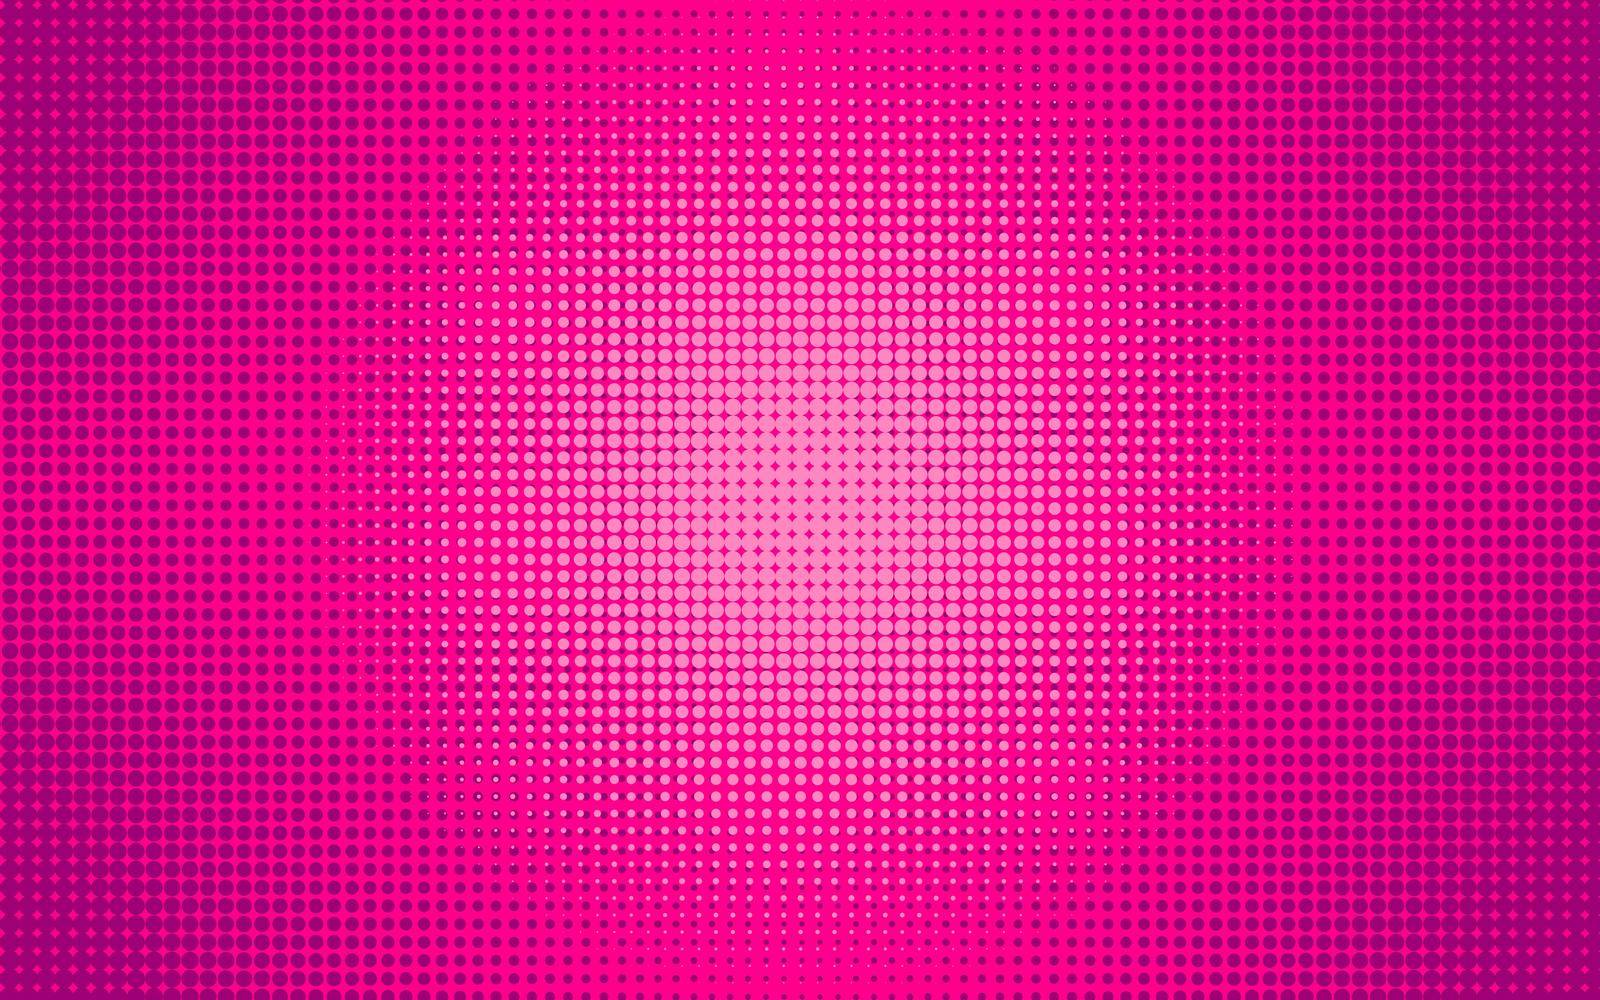 Light effect. Gradient background with dots . Halftone dots design.